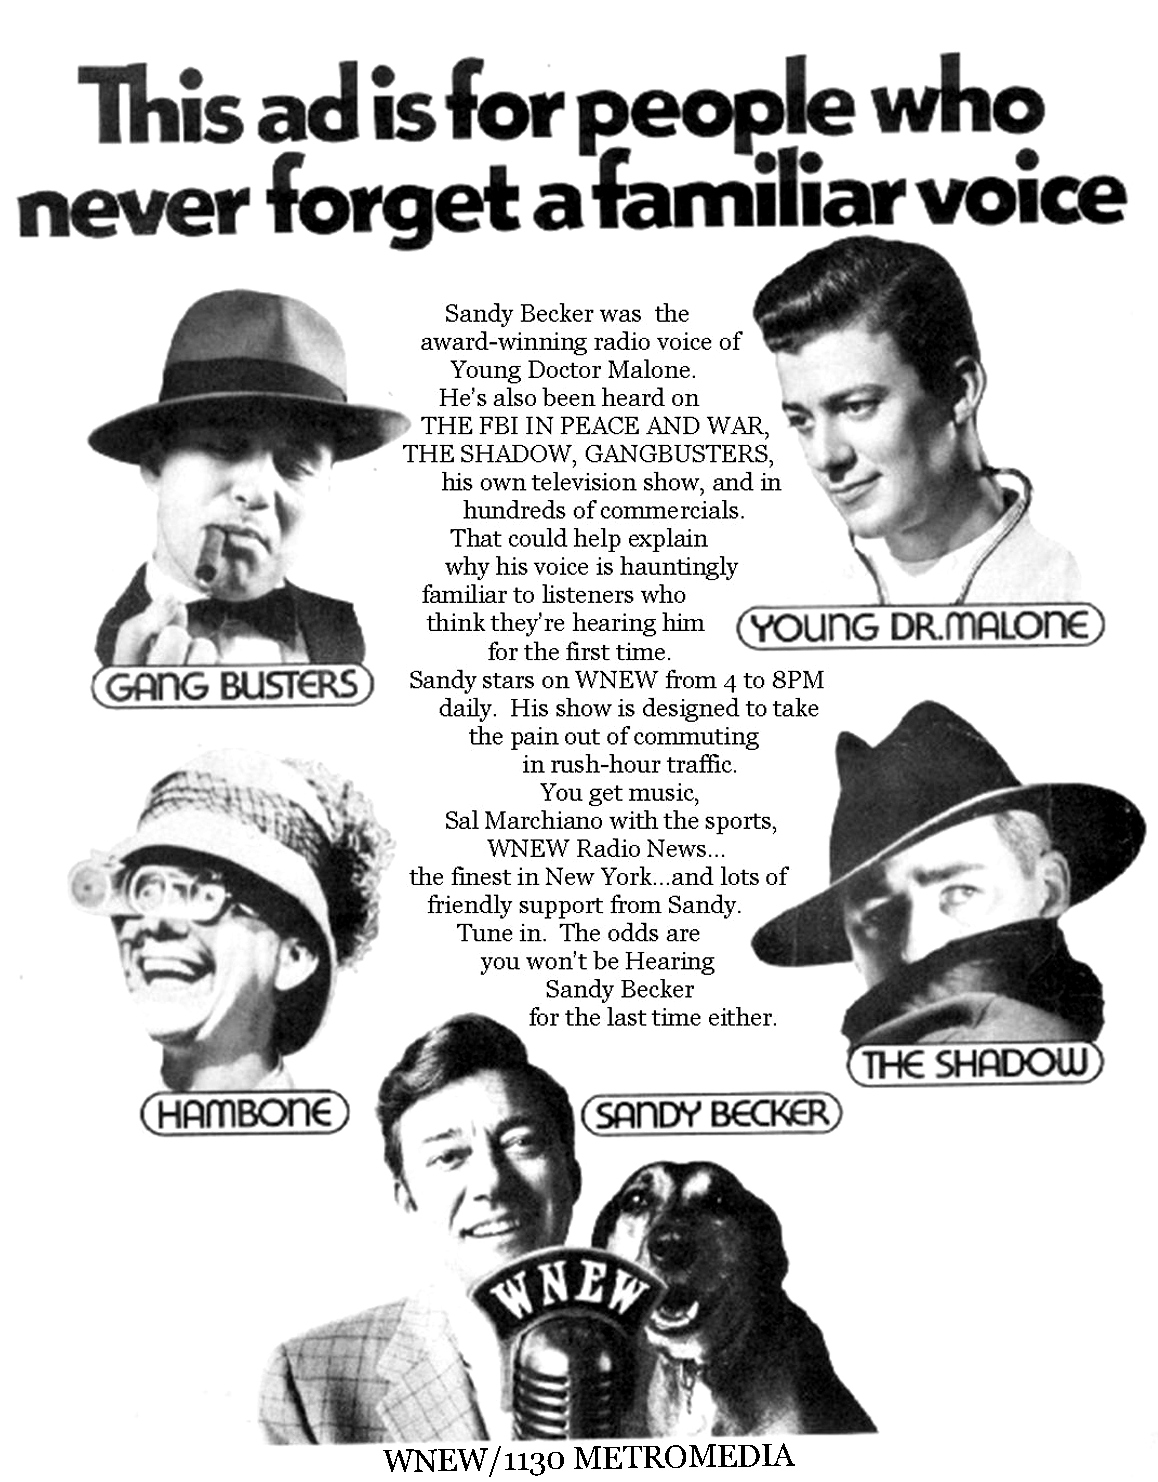 An ad for WNEW 1130 radio featuring Sandy Becker in his roles from Young Doctor Malone, The Shadow, Gang Busters and as Hambone on the Sandy Becker Show